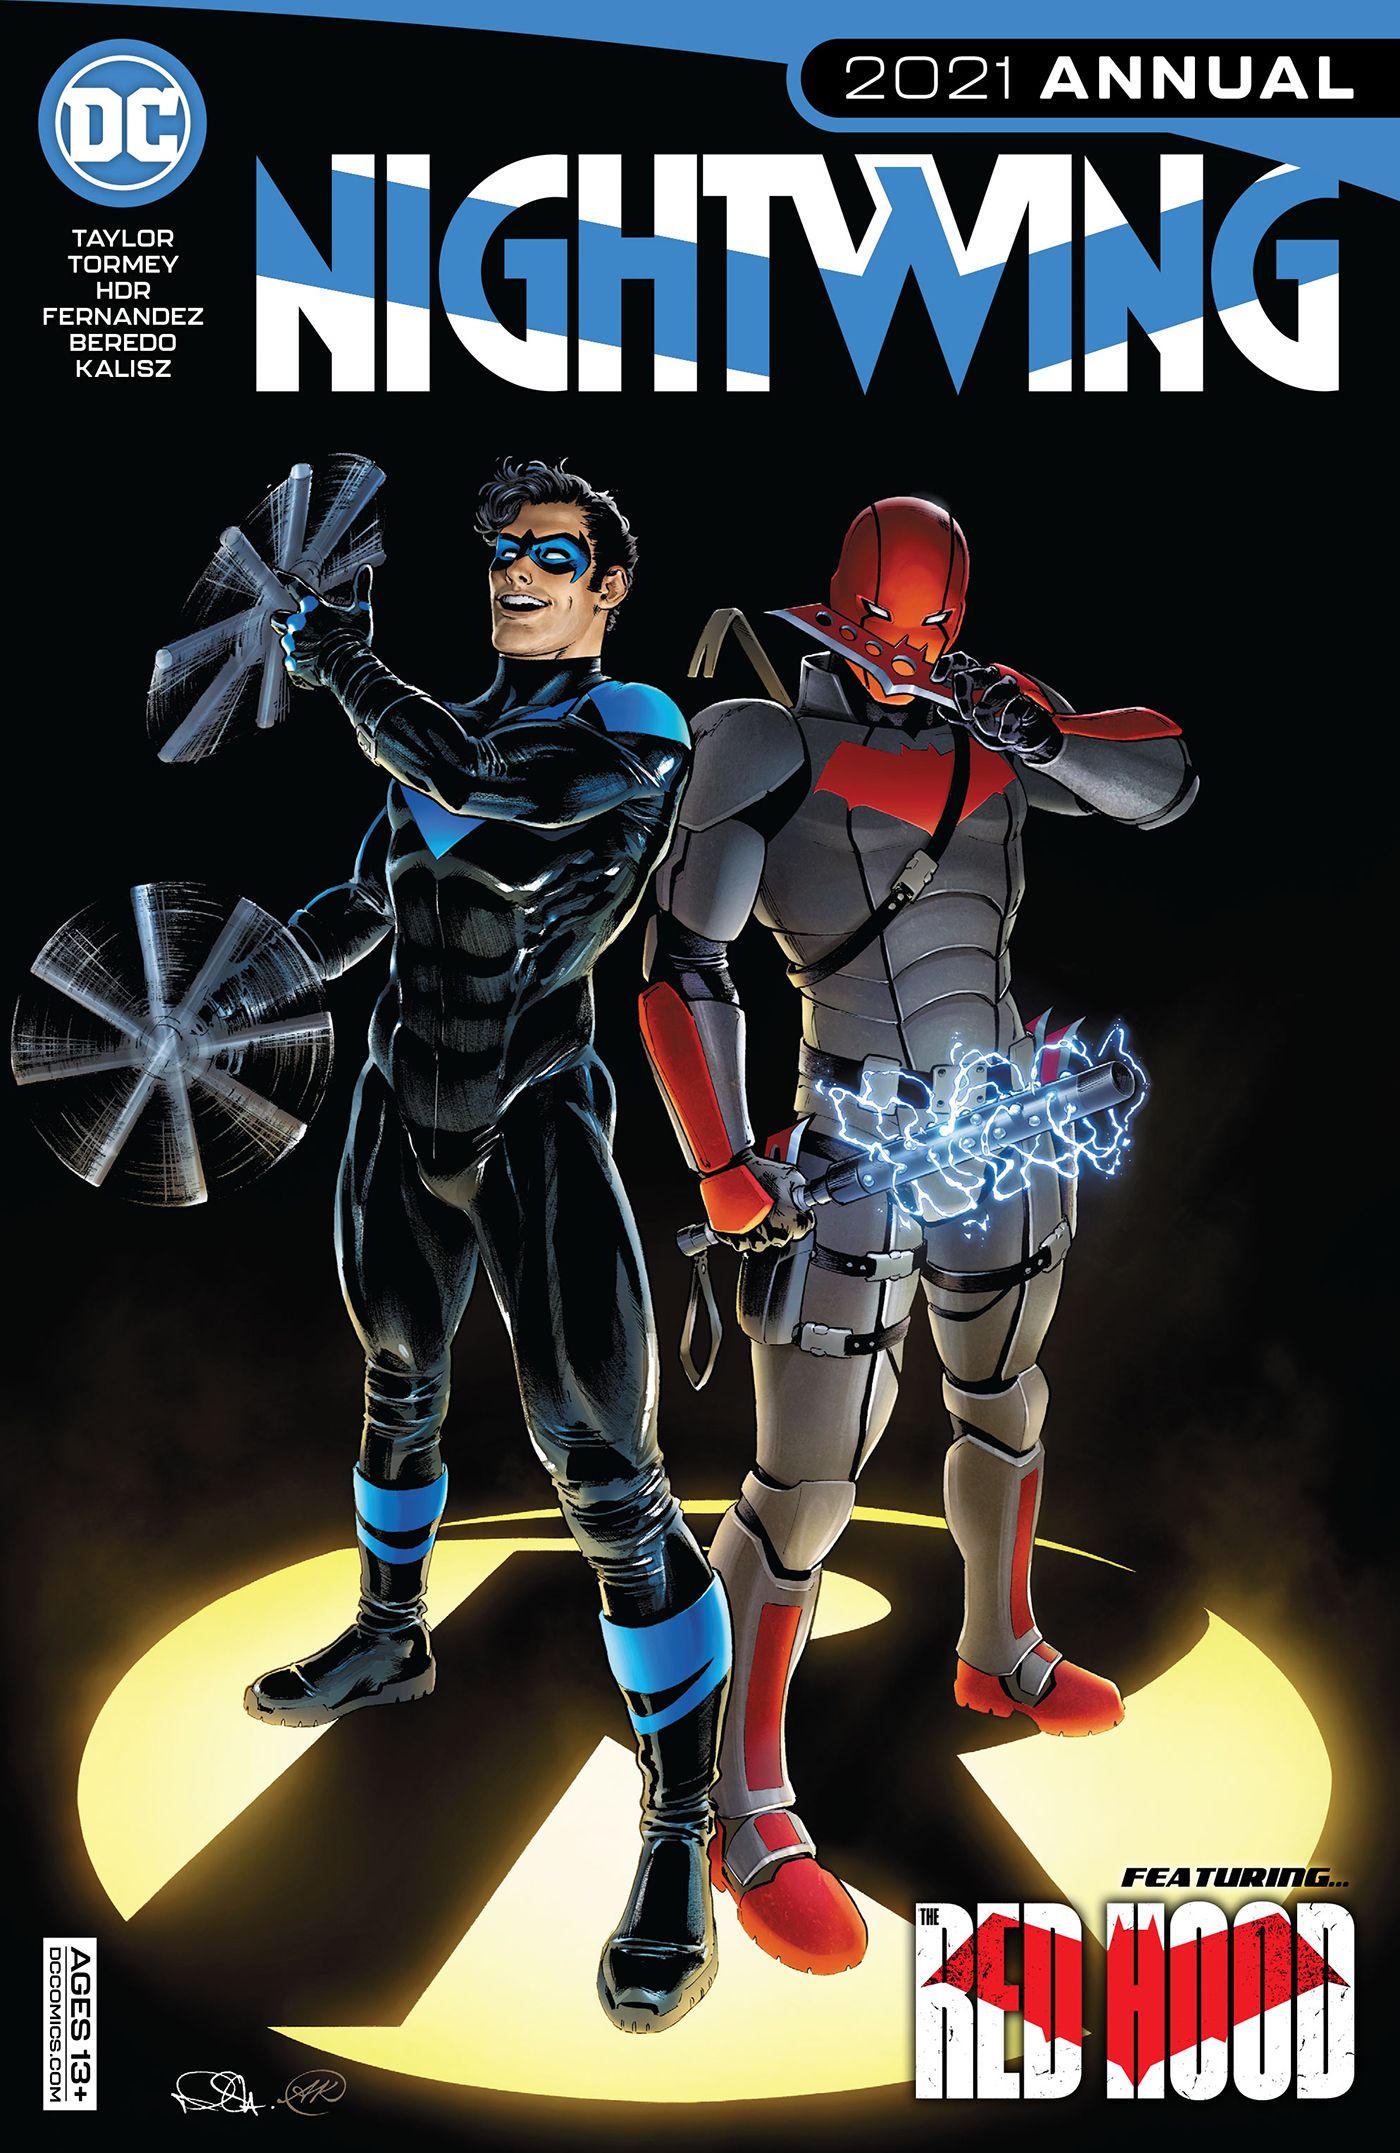 Nightwing and Red Hood stand side-by-side on the cover of Nightwing's 2021 Annual.